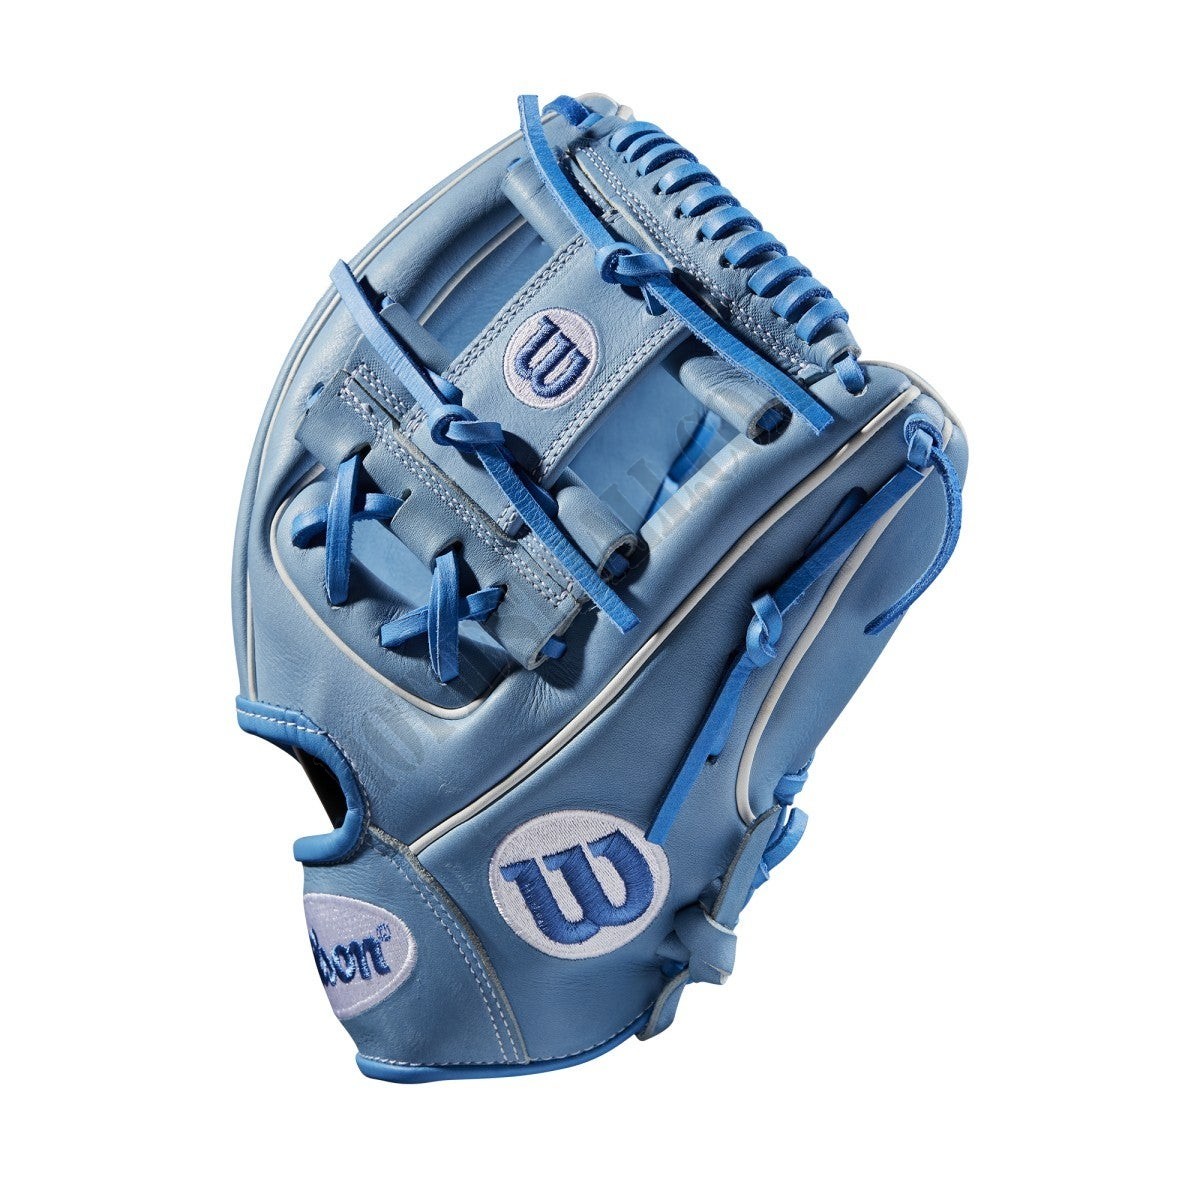 2020 Autism Speaks A2000 1786 11.5" Infield Baseball Glove - Limited Edition ● Wilson Promotions - -3